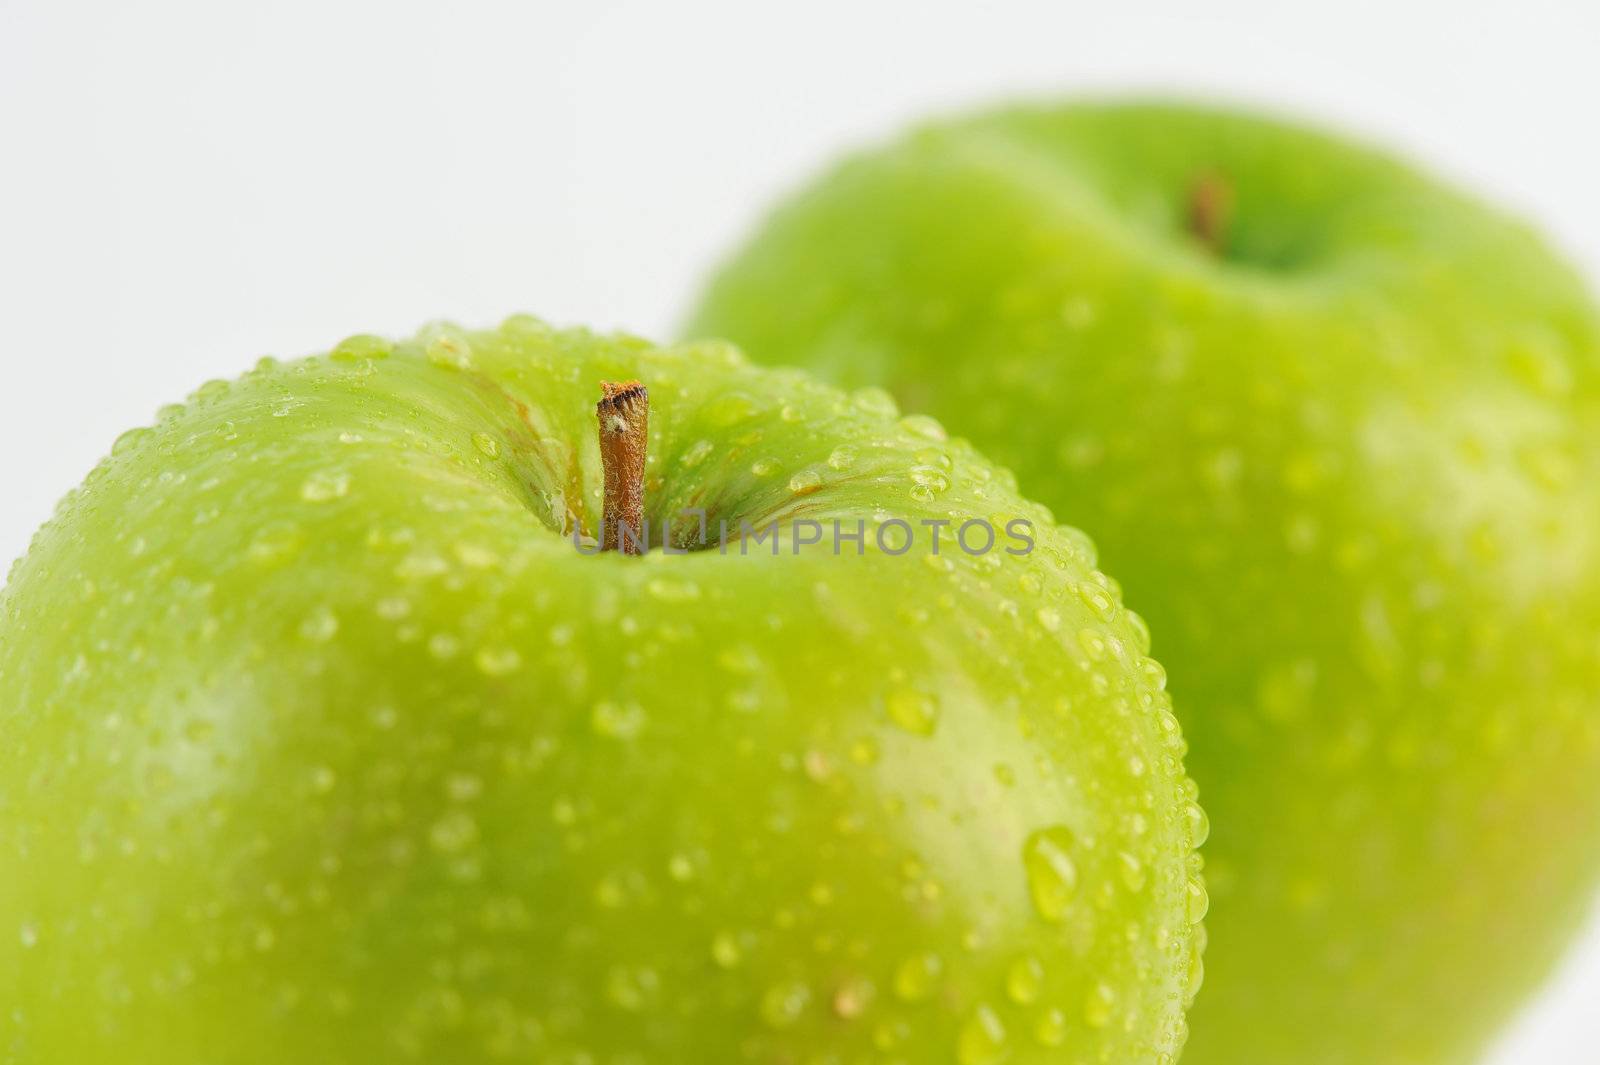 green apple can be cooked in a variety of foods